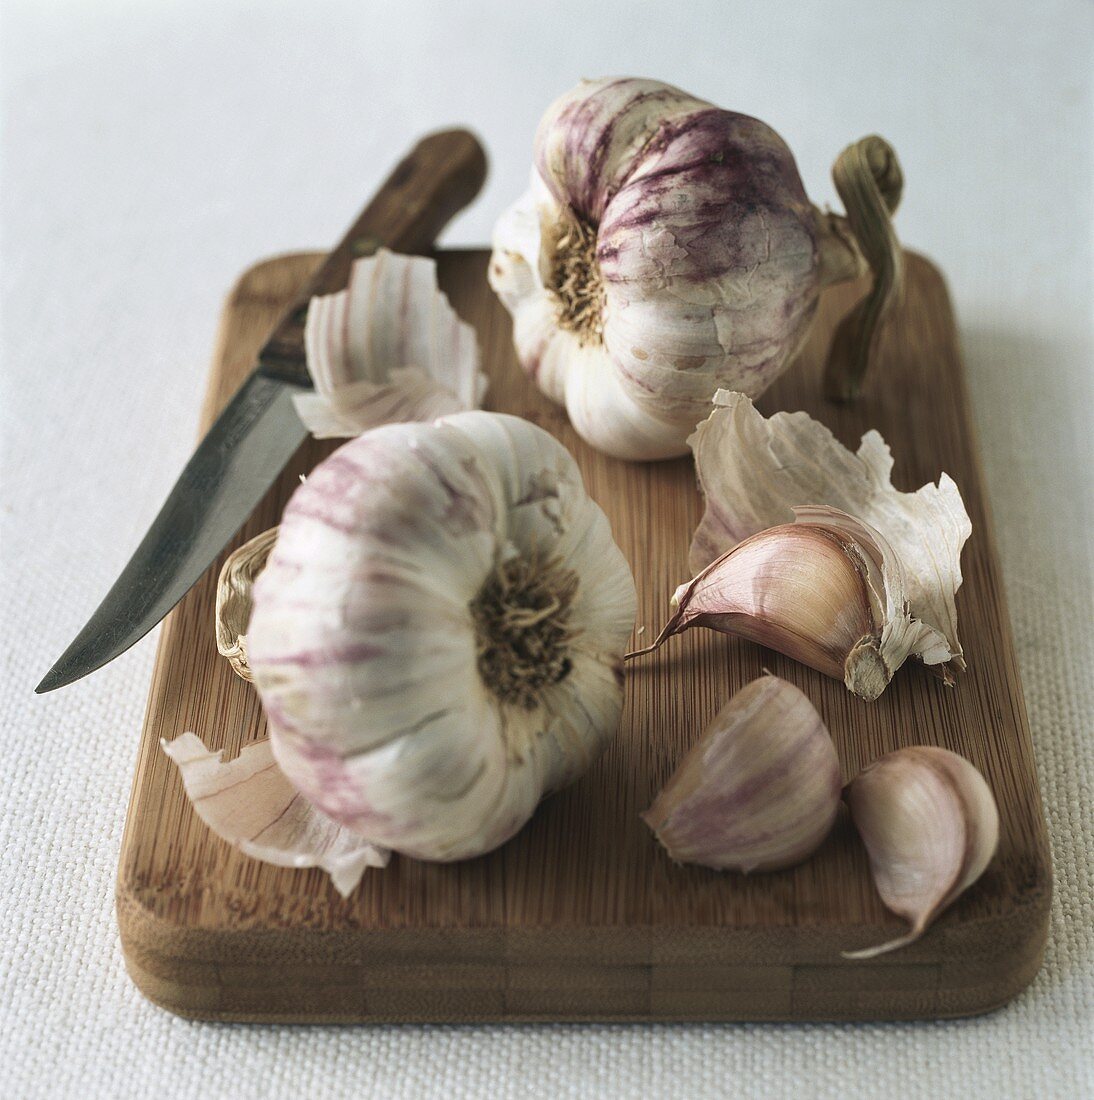 Garlic with knife on wooden board